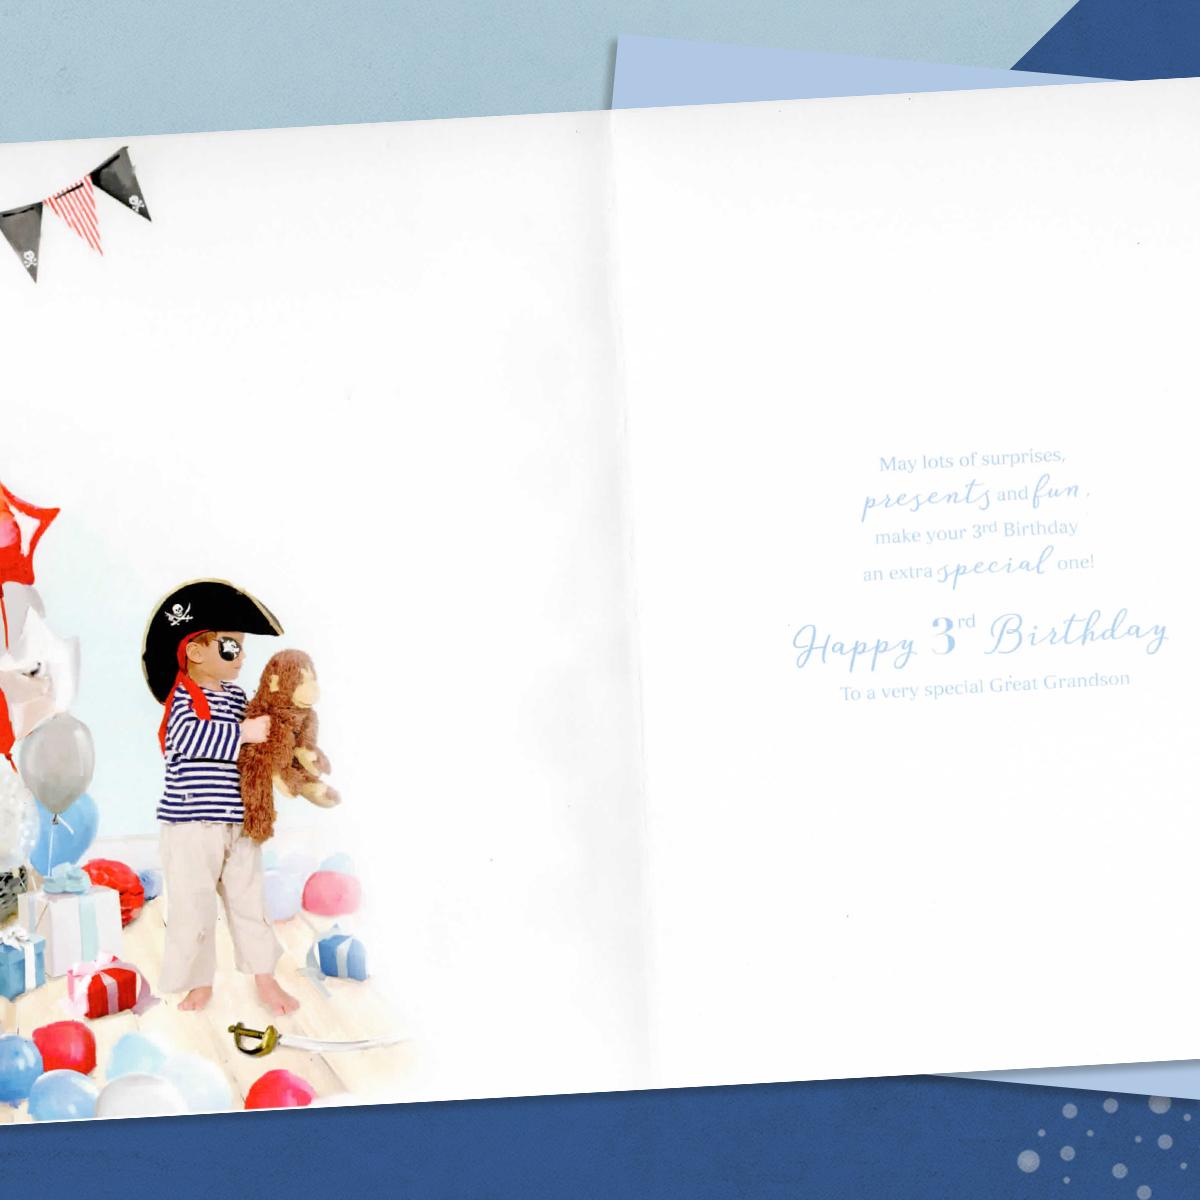 Great Grandson Age 3 Birthday Card Showing Layout And Printed Text